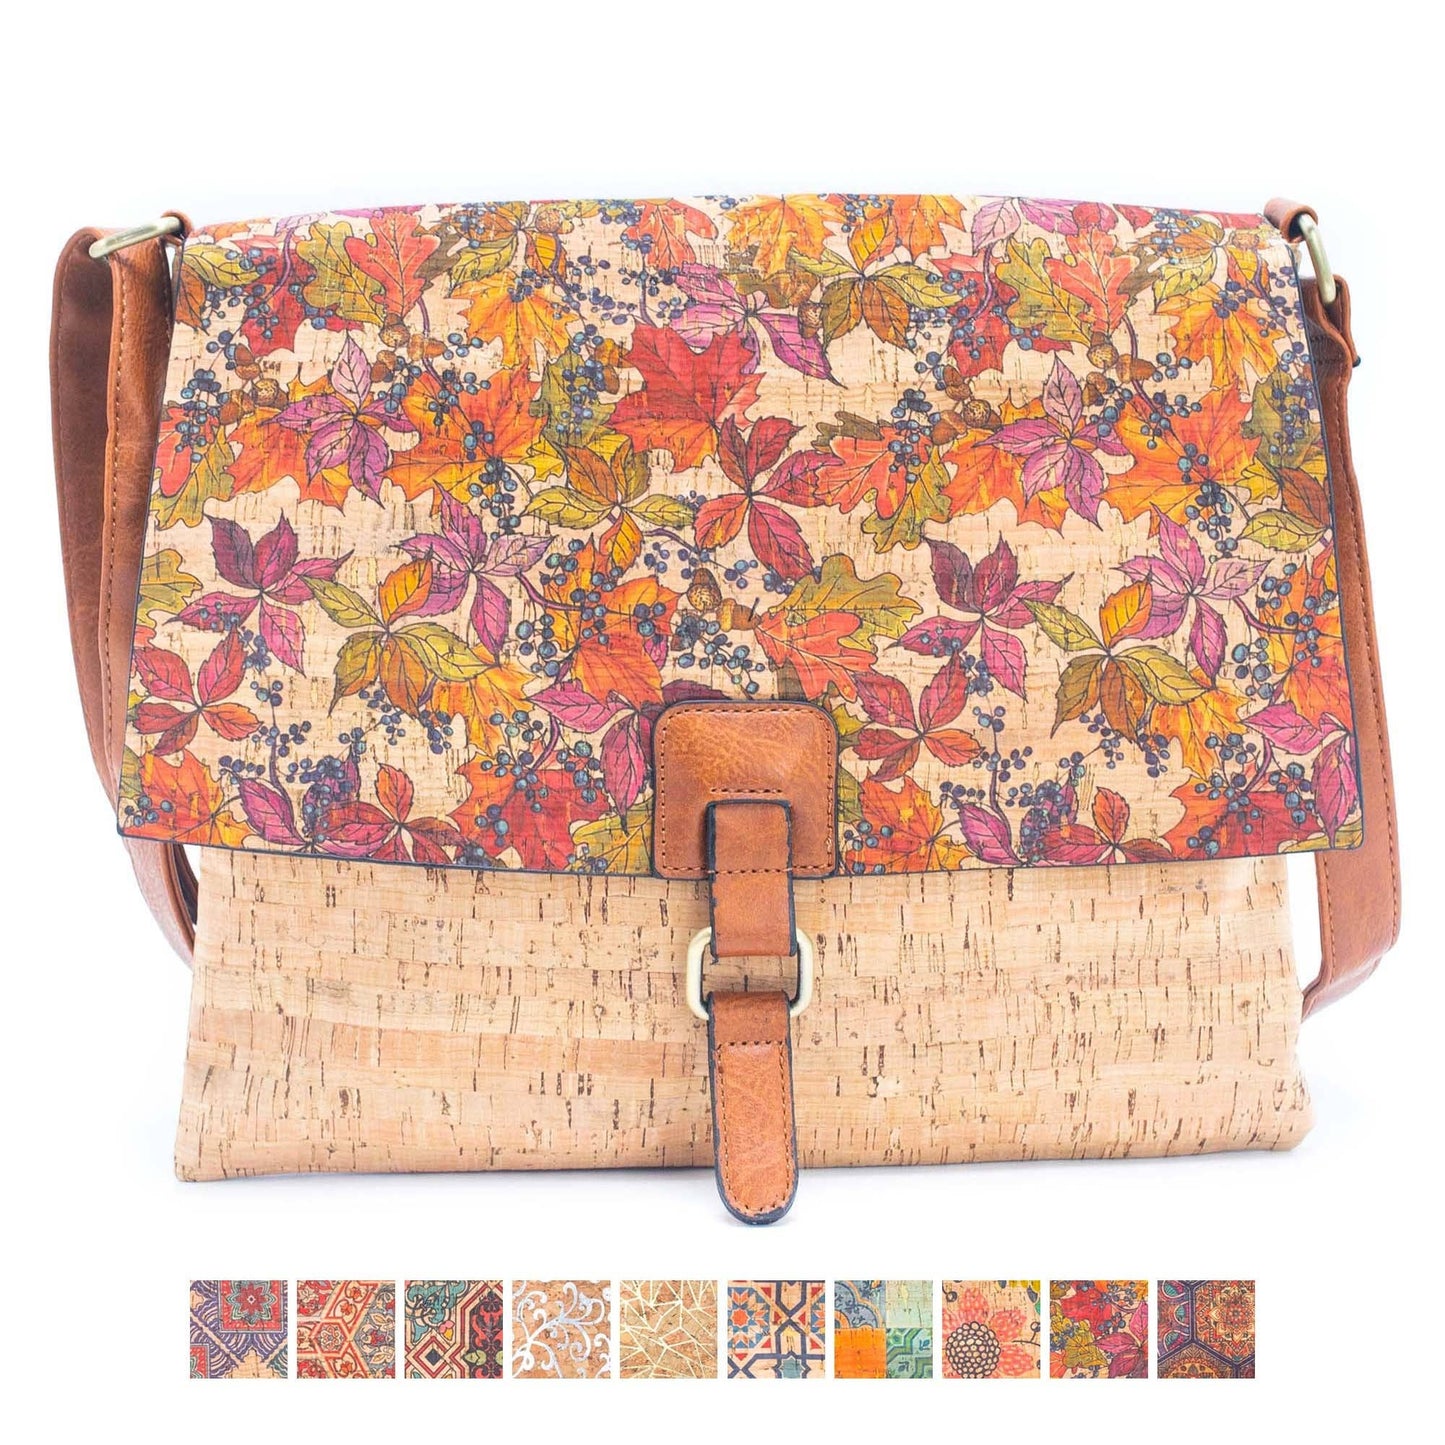 Cork Crossbody Bag with Mosaic and Floral Prints BAGD-464-0